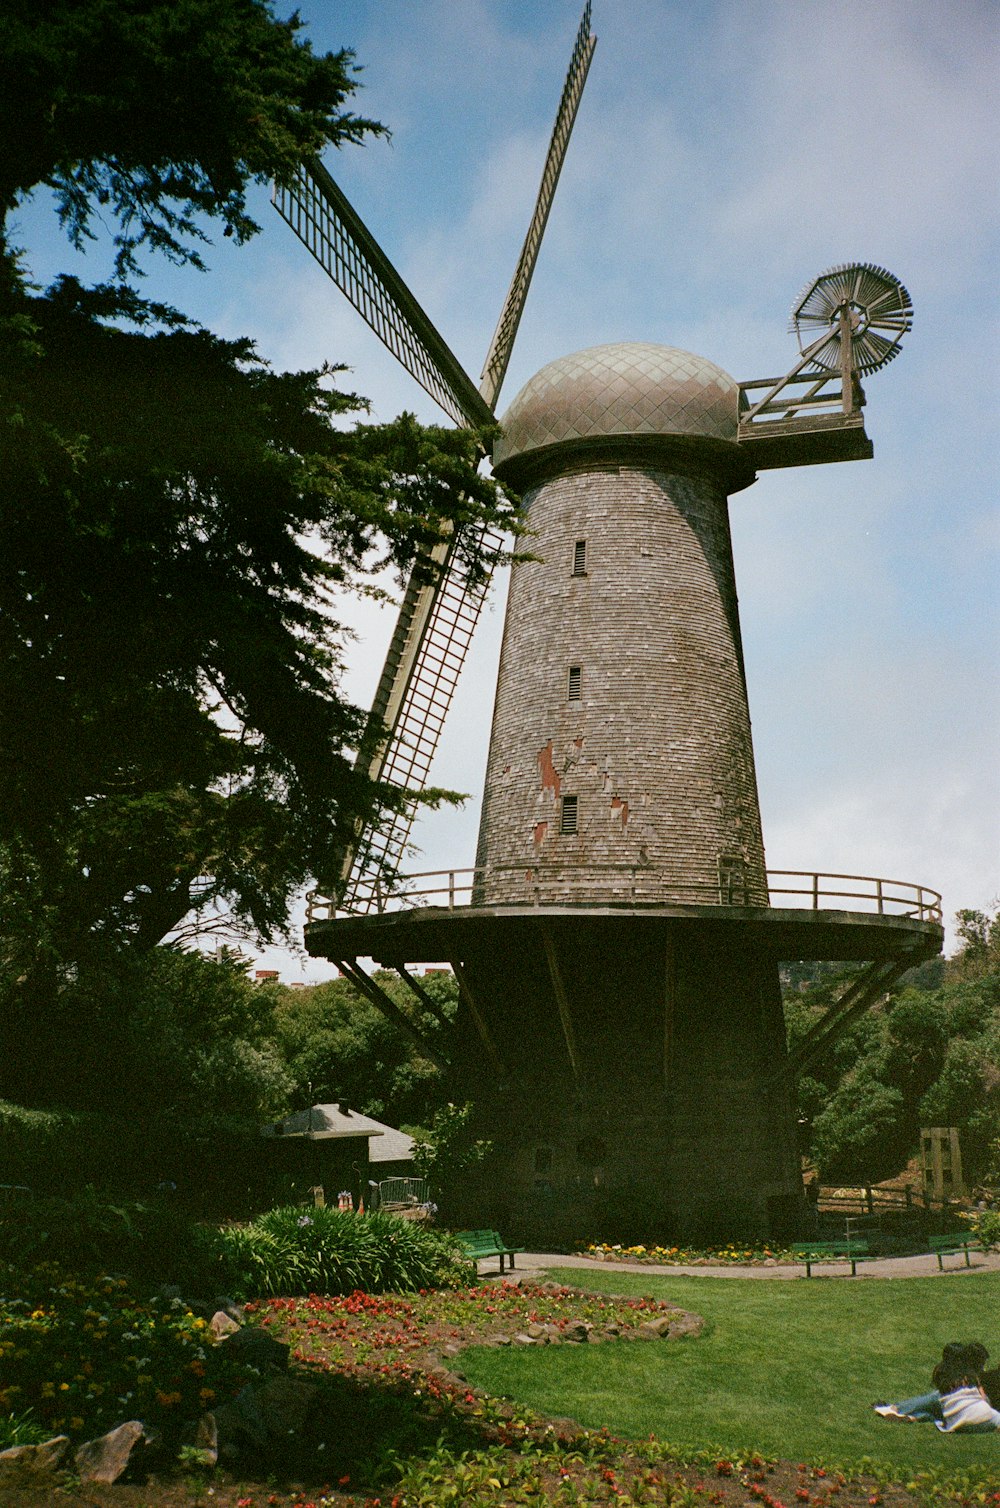 a windmill that is sitting in the grass